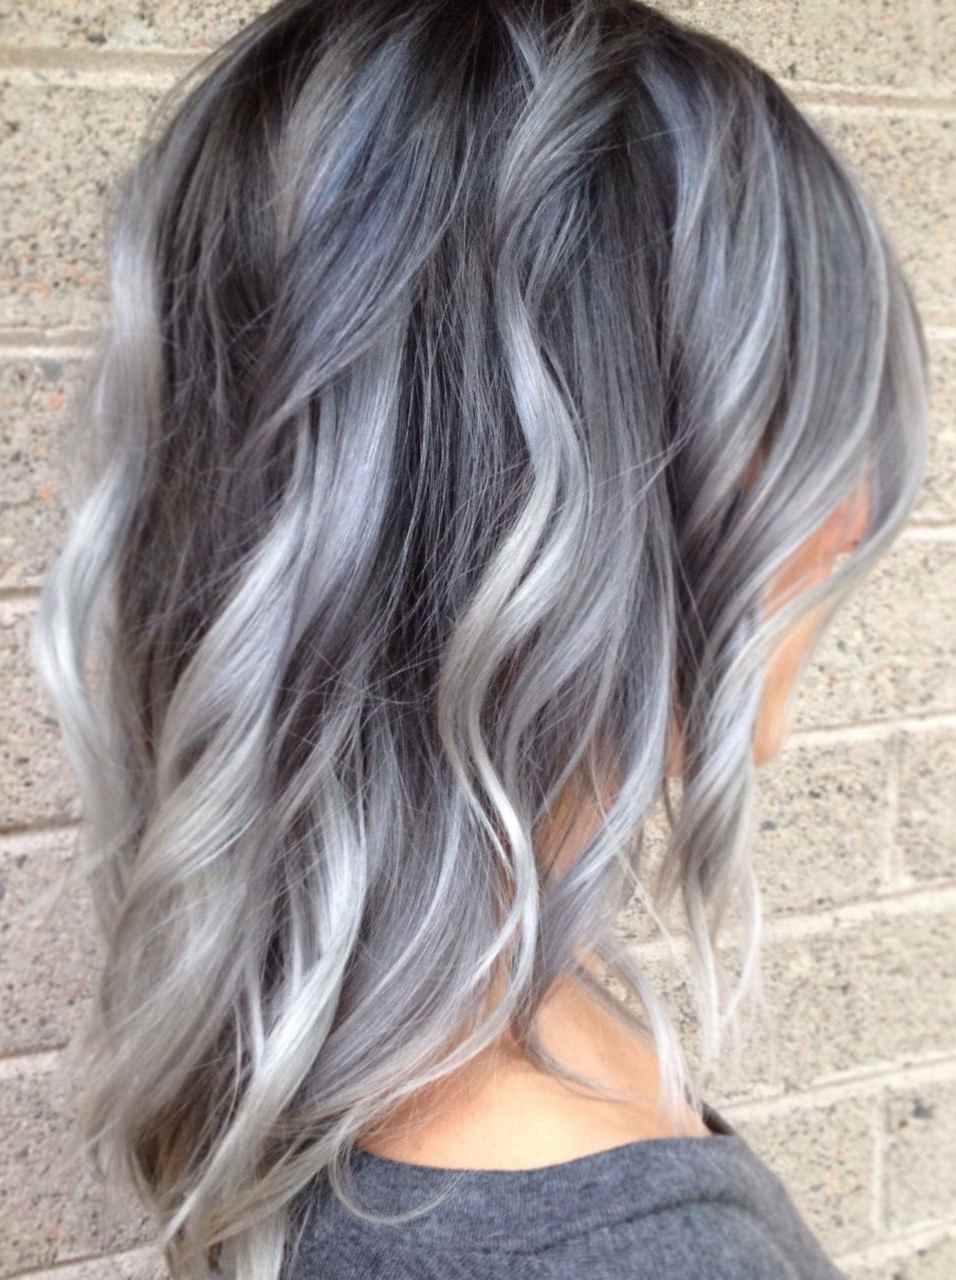 Hair silver-colored gray strands themselves make blonde hair harmless